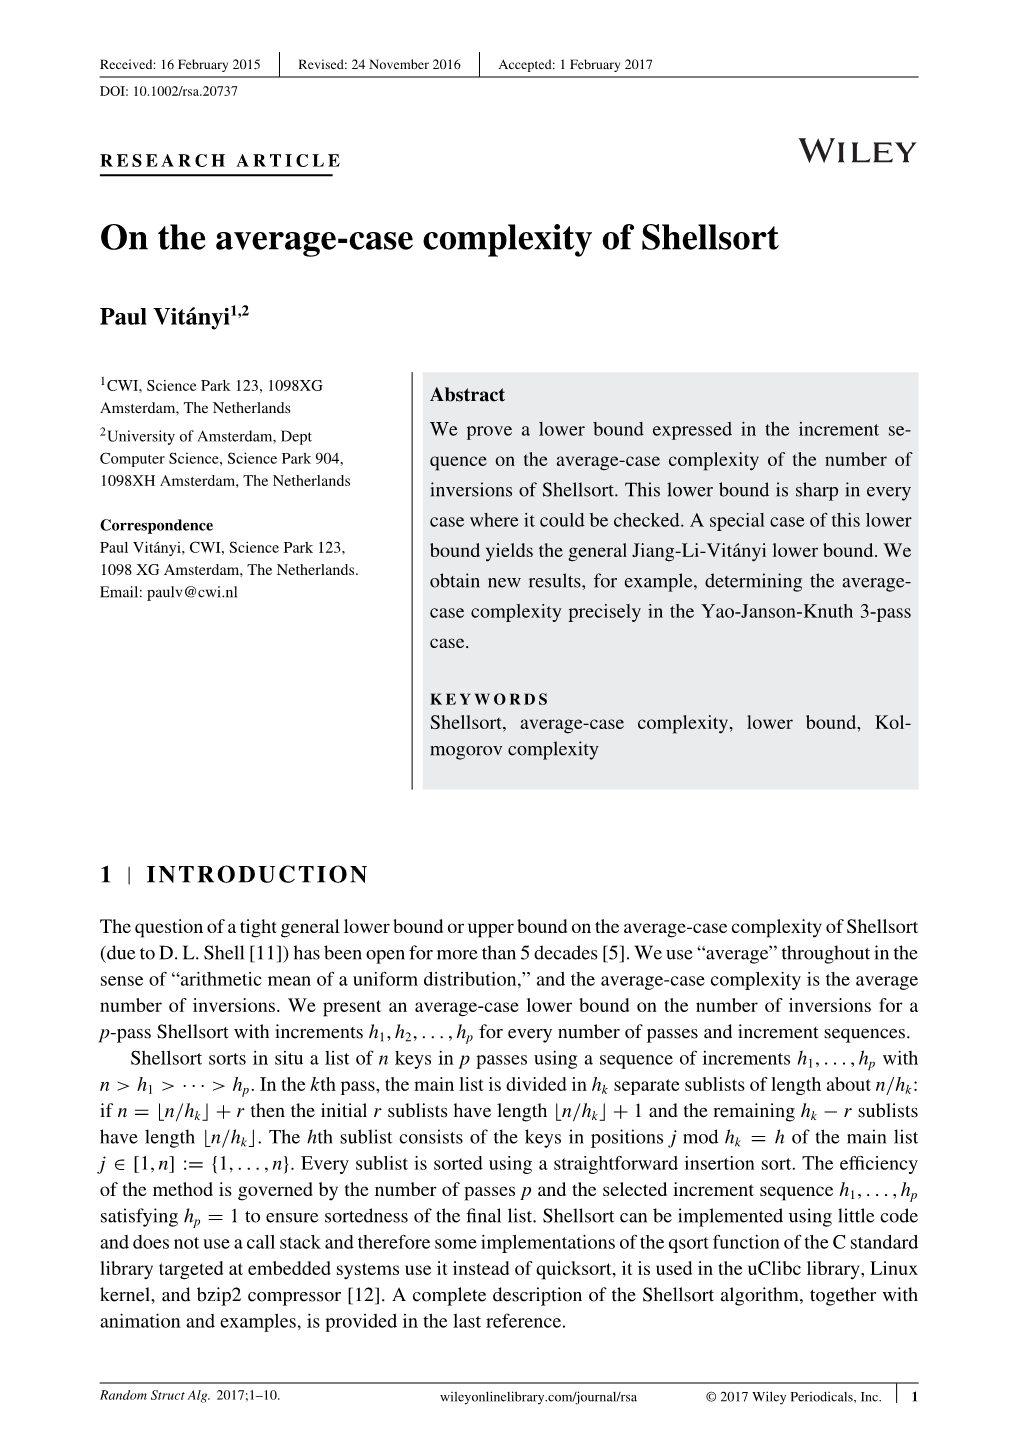 On the Average‐Case Complexity of Shellsort